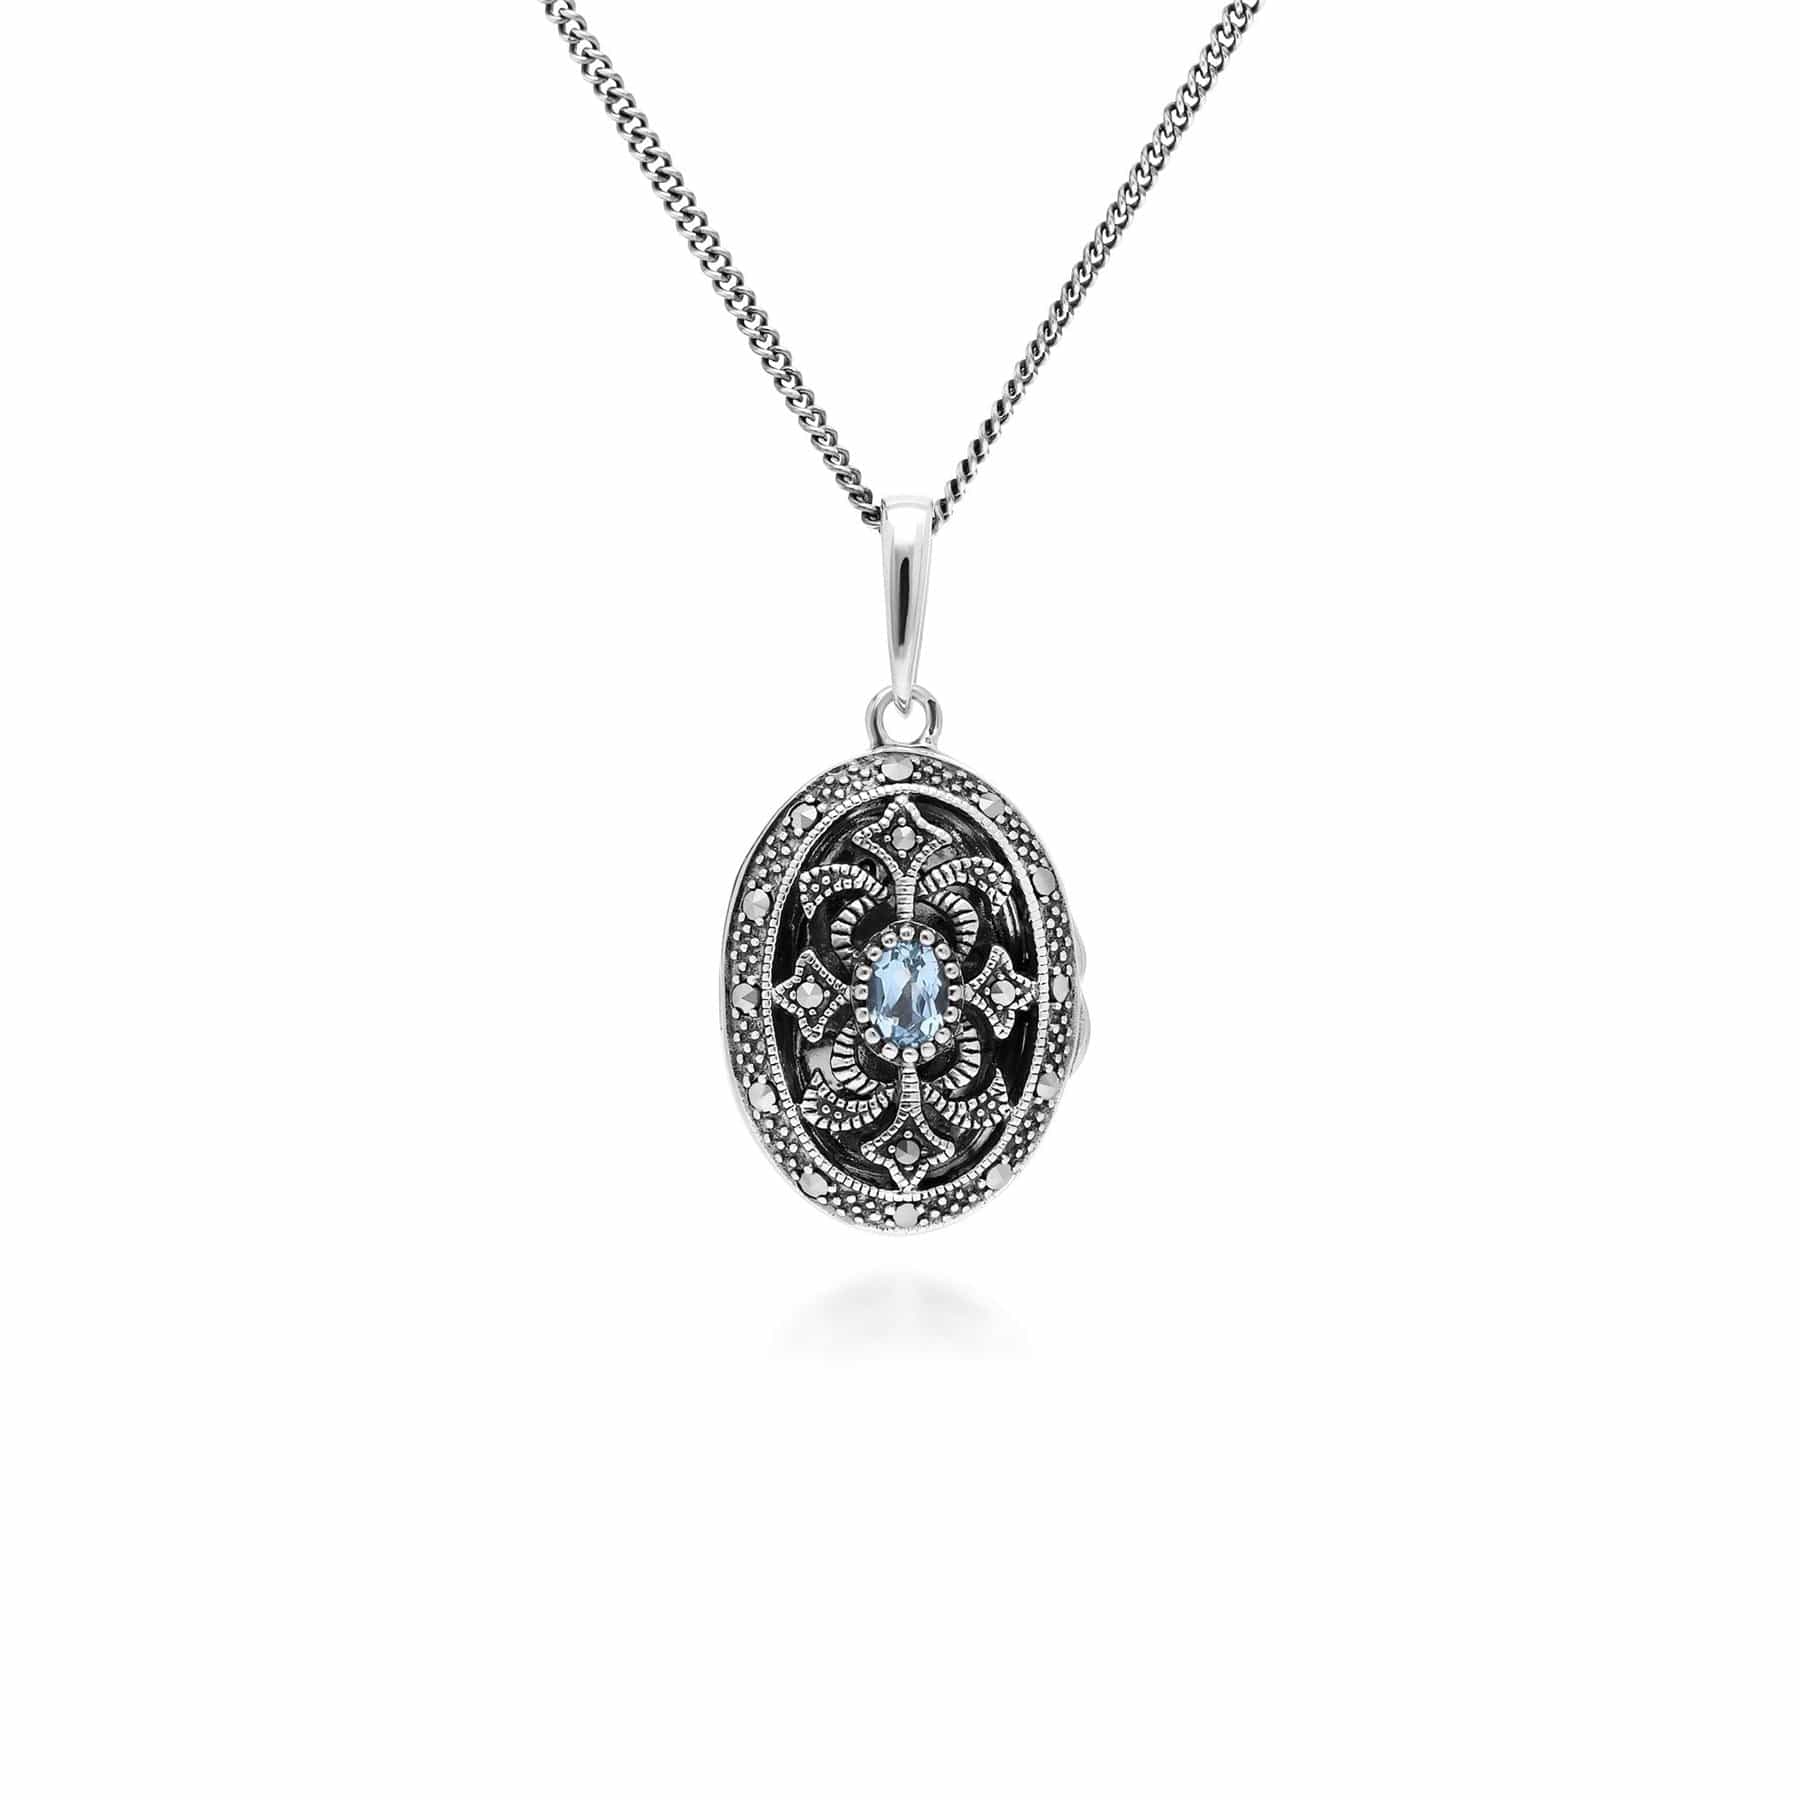 214N716206925 Art Nouveau Style Oval Aquamarine & Marcasite Locket Necklace in 925 Sterling Silver 1